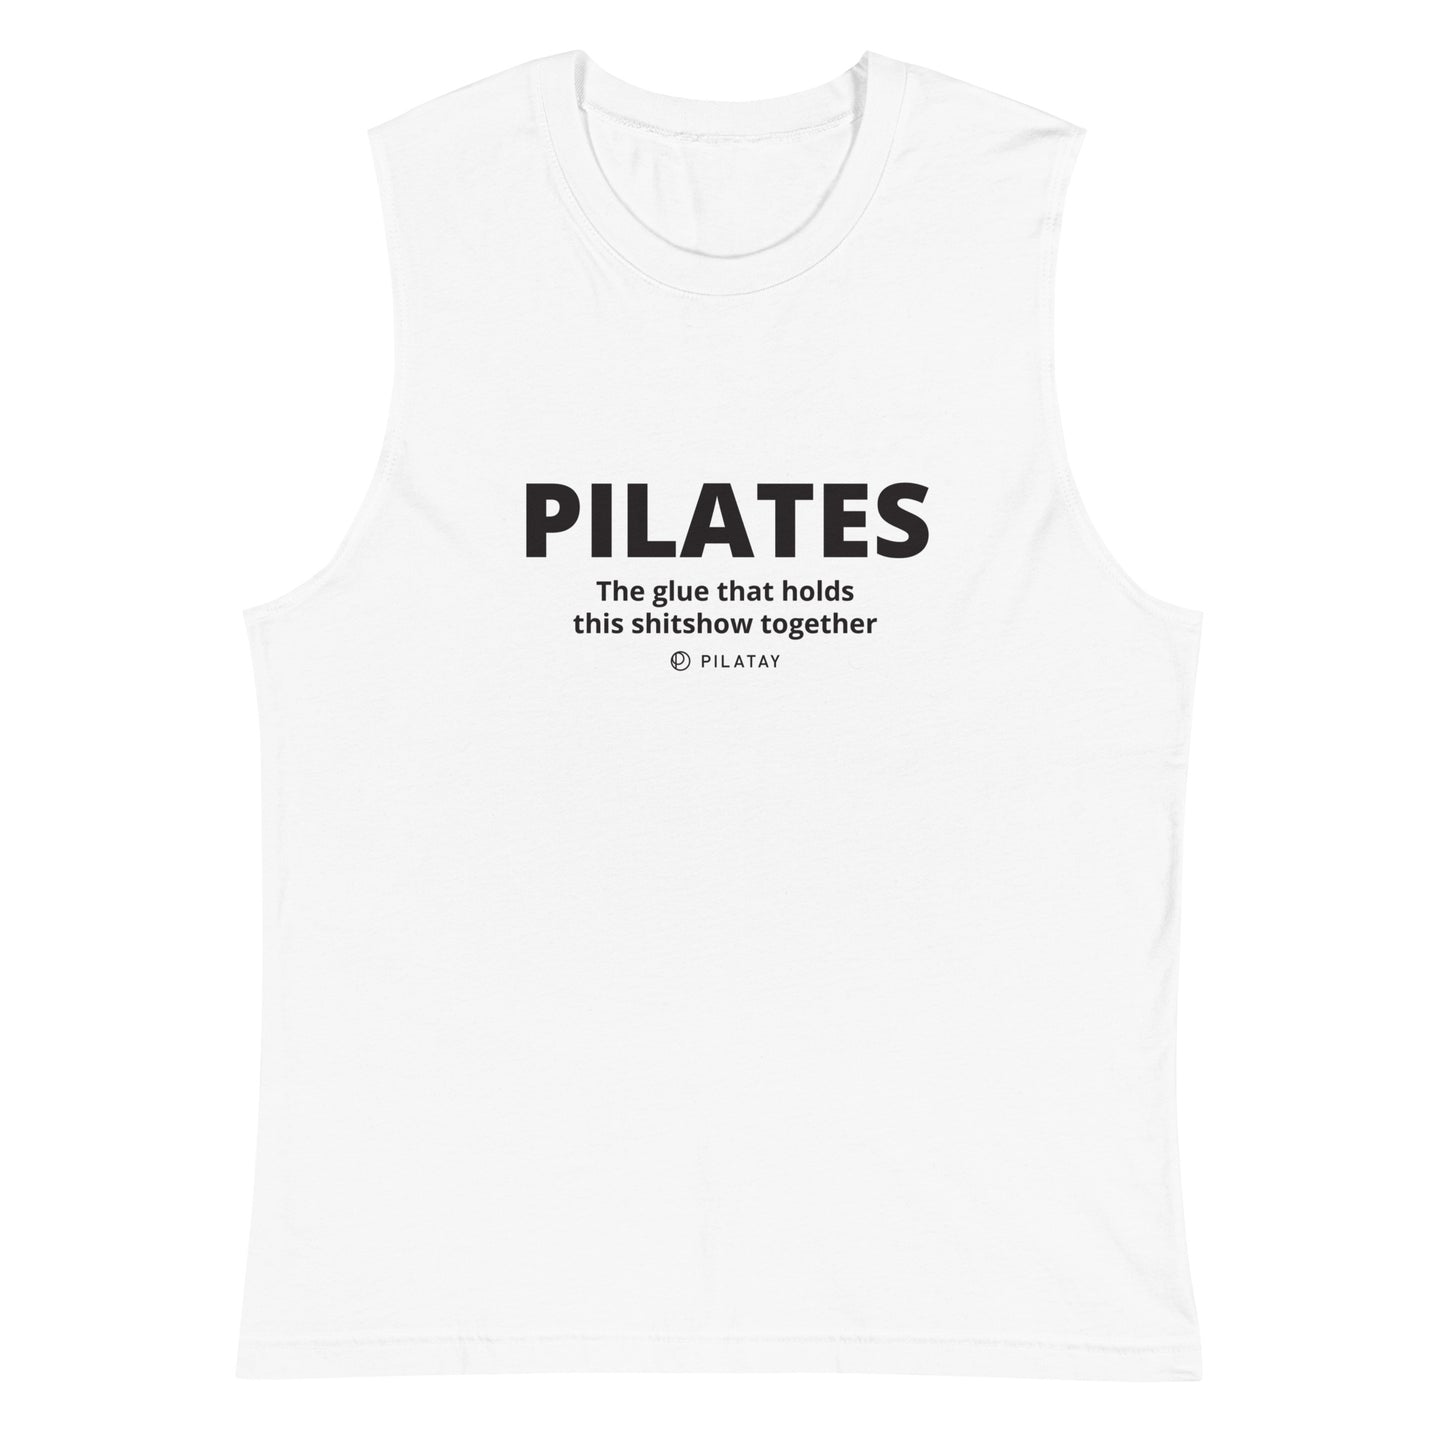 Pilates: The Glue That Holds This Shitshow Together Unisex Muscle Tank